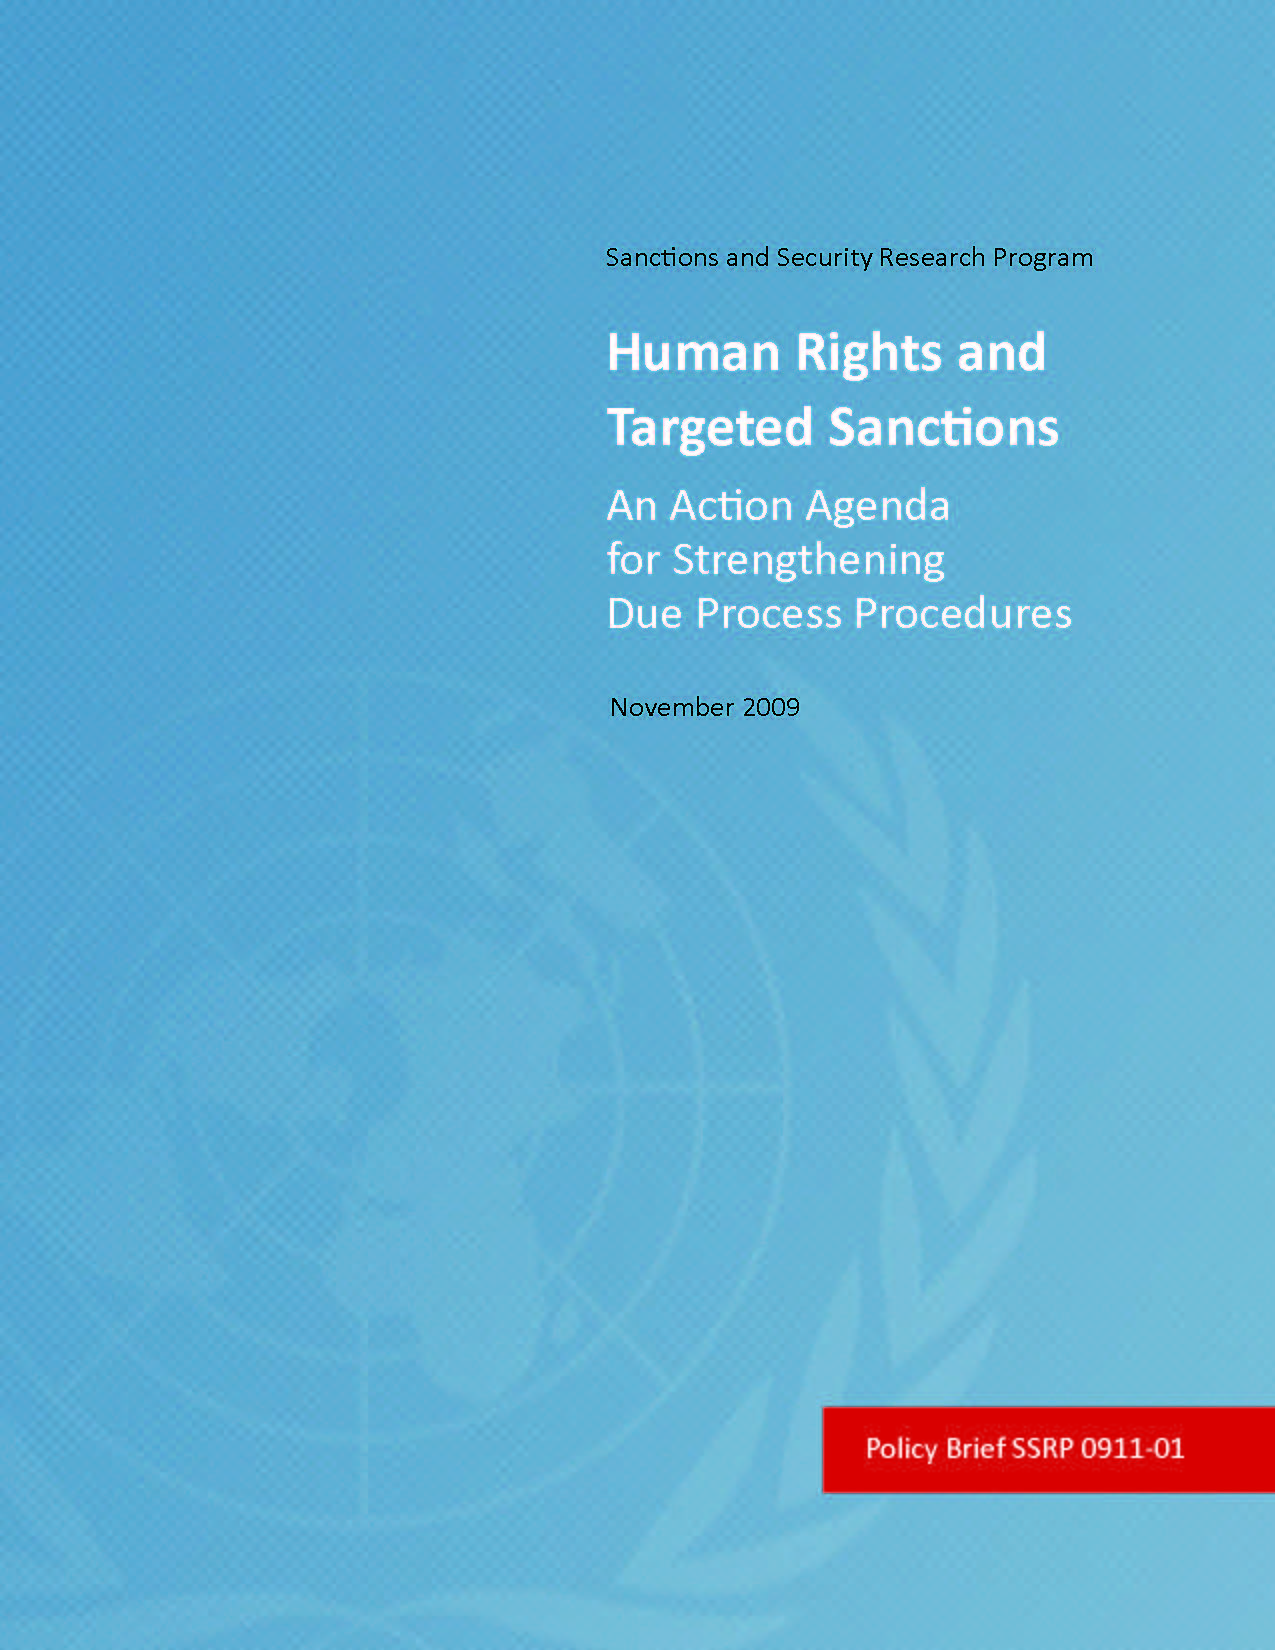 Human Rights and Targeted Sanctions: An Action Agenda for Strengthening Due Process Procedures